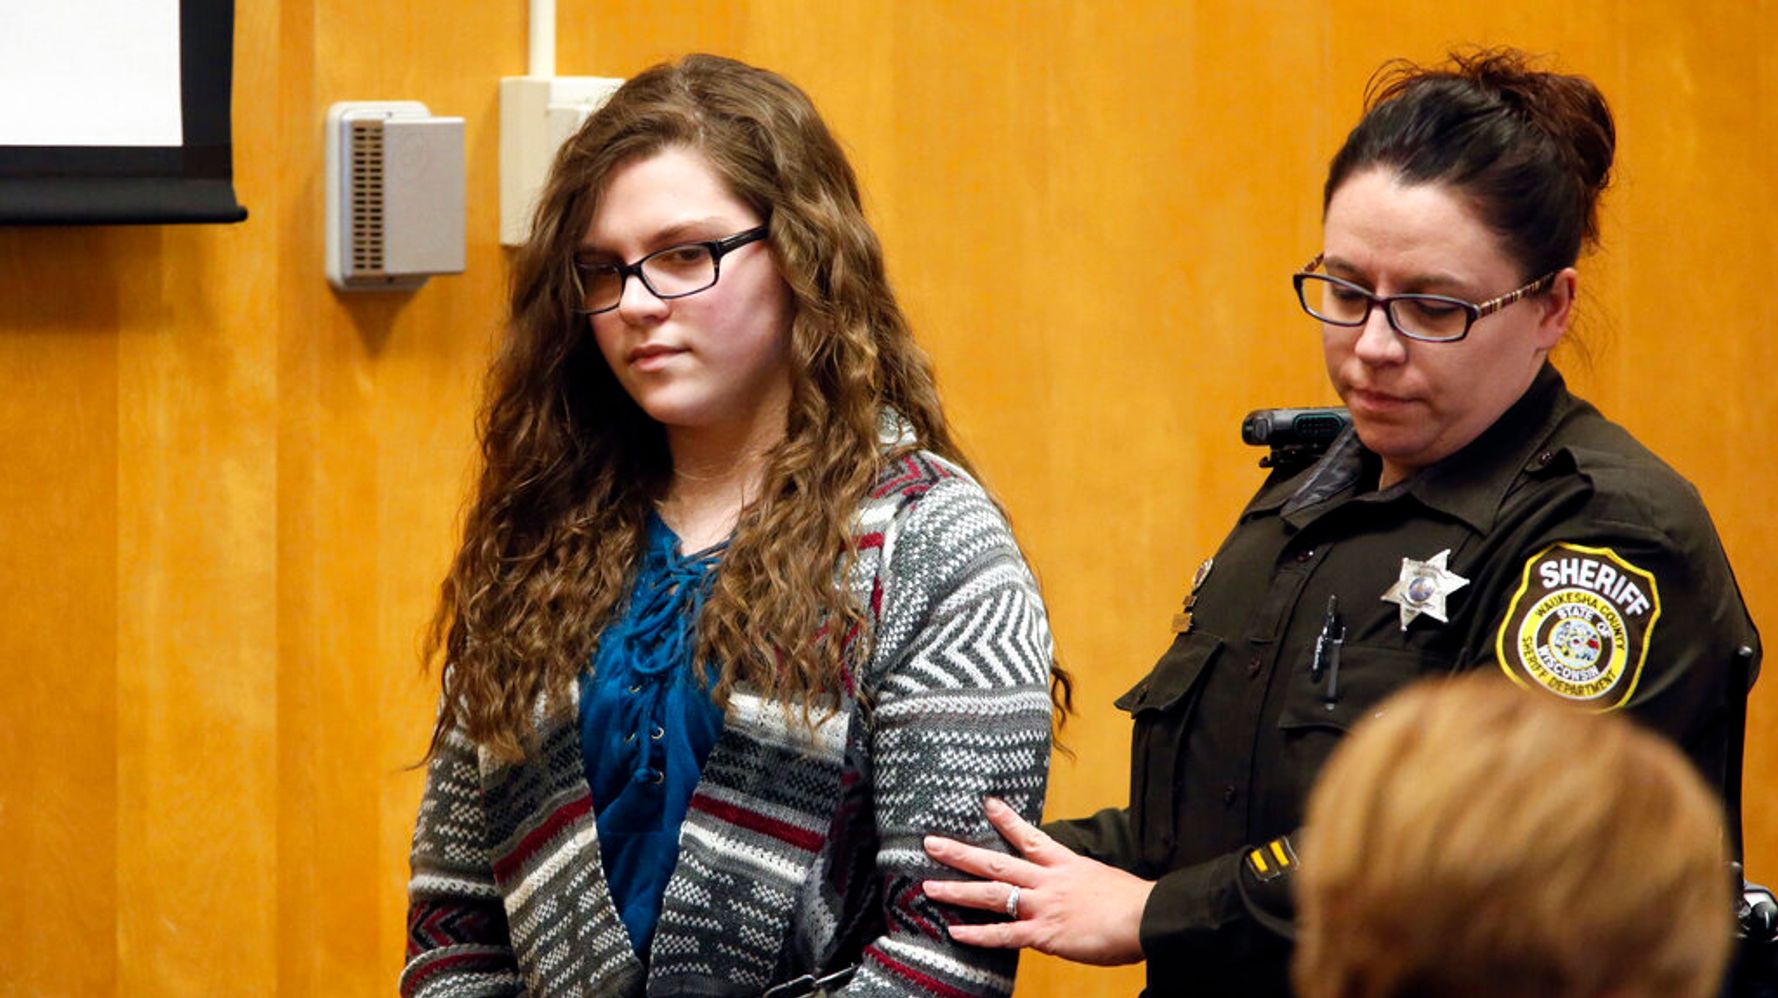 Woman Who Admitted To Slender Man Attack To Be Freed Monday